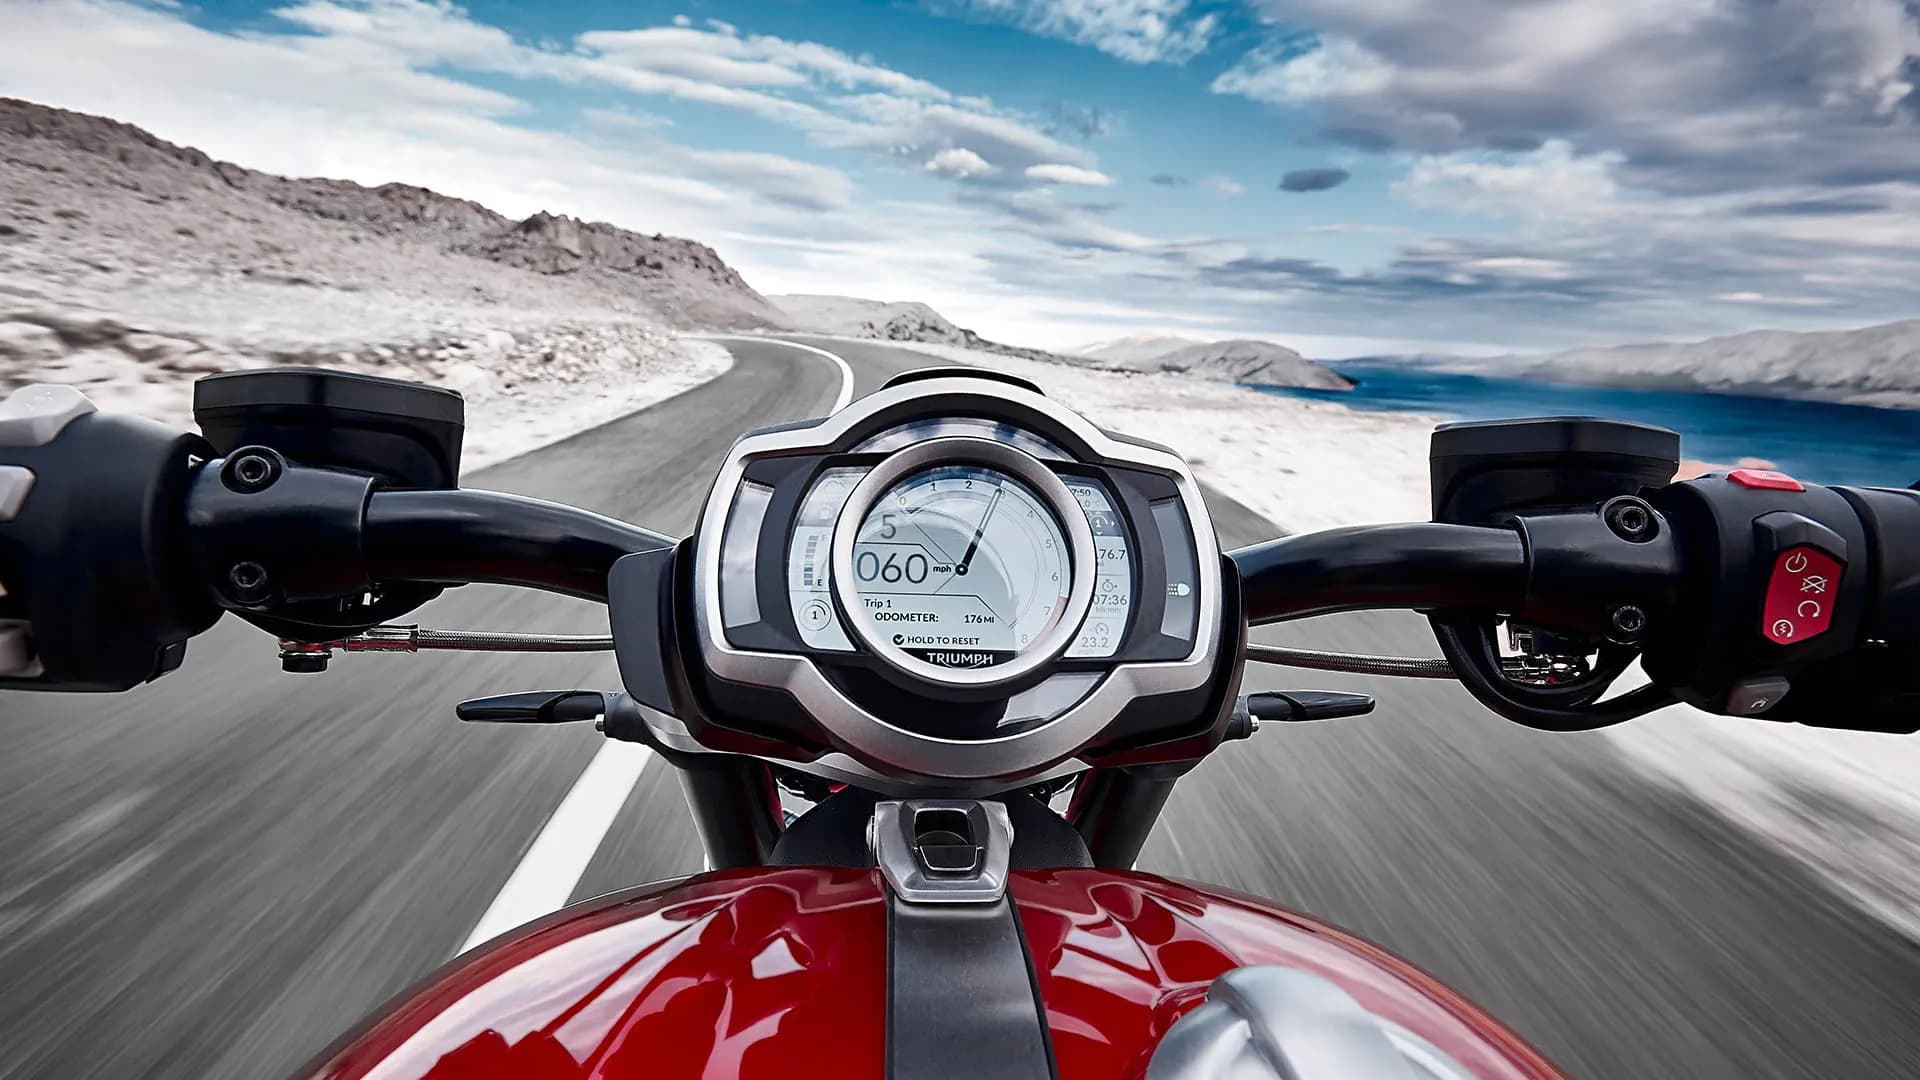 Handling view of the Triumph Rocket 3 R built with a focus of the second generation TFT instruments